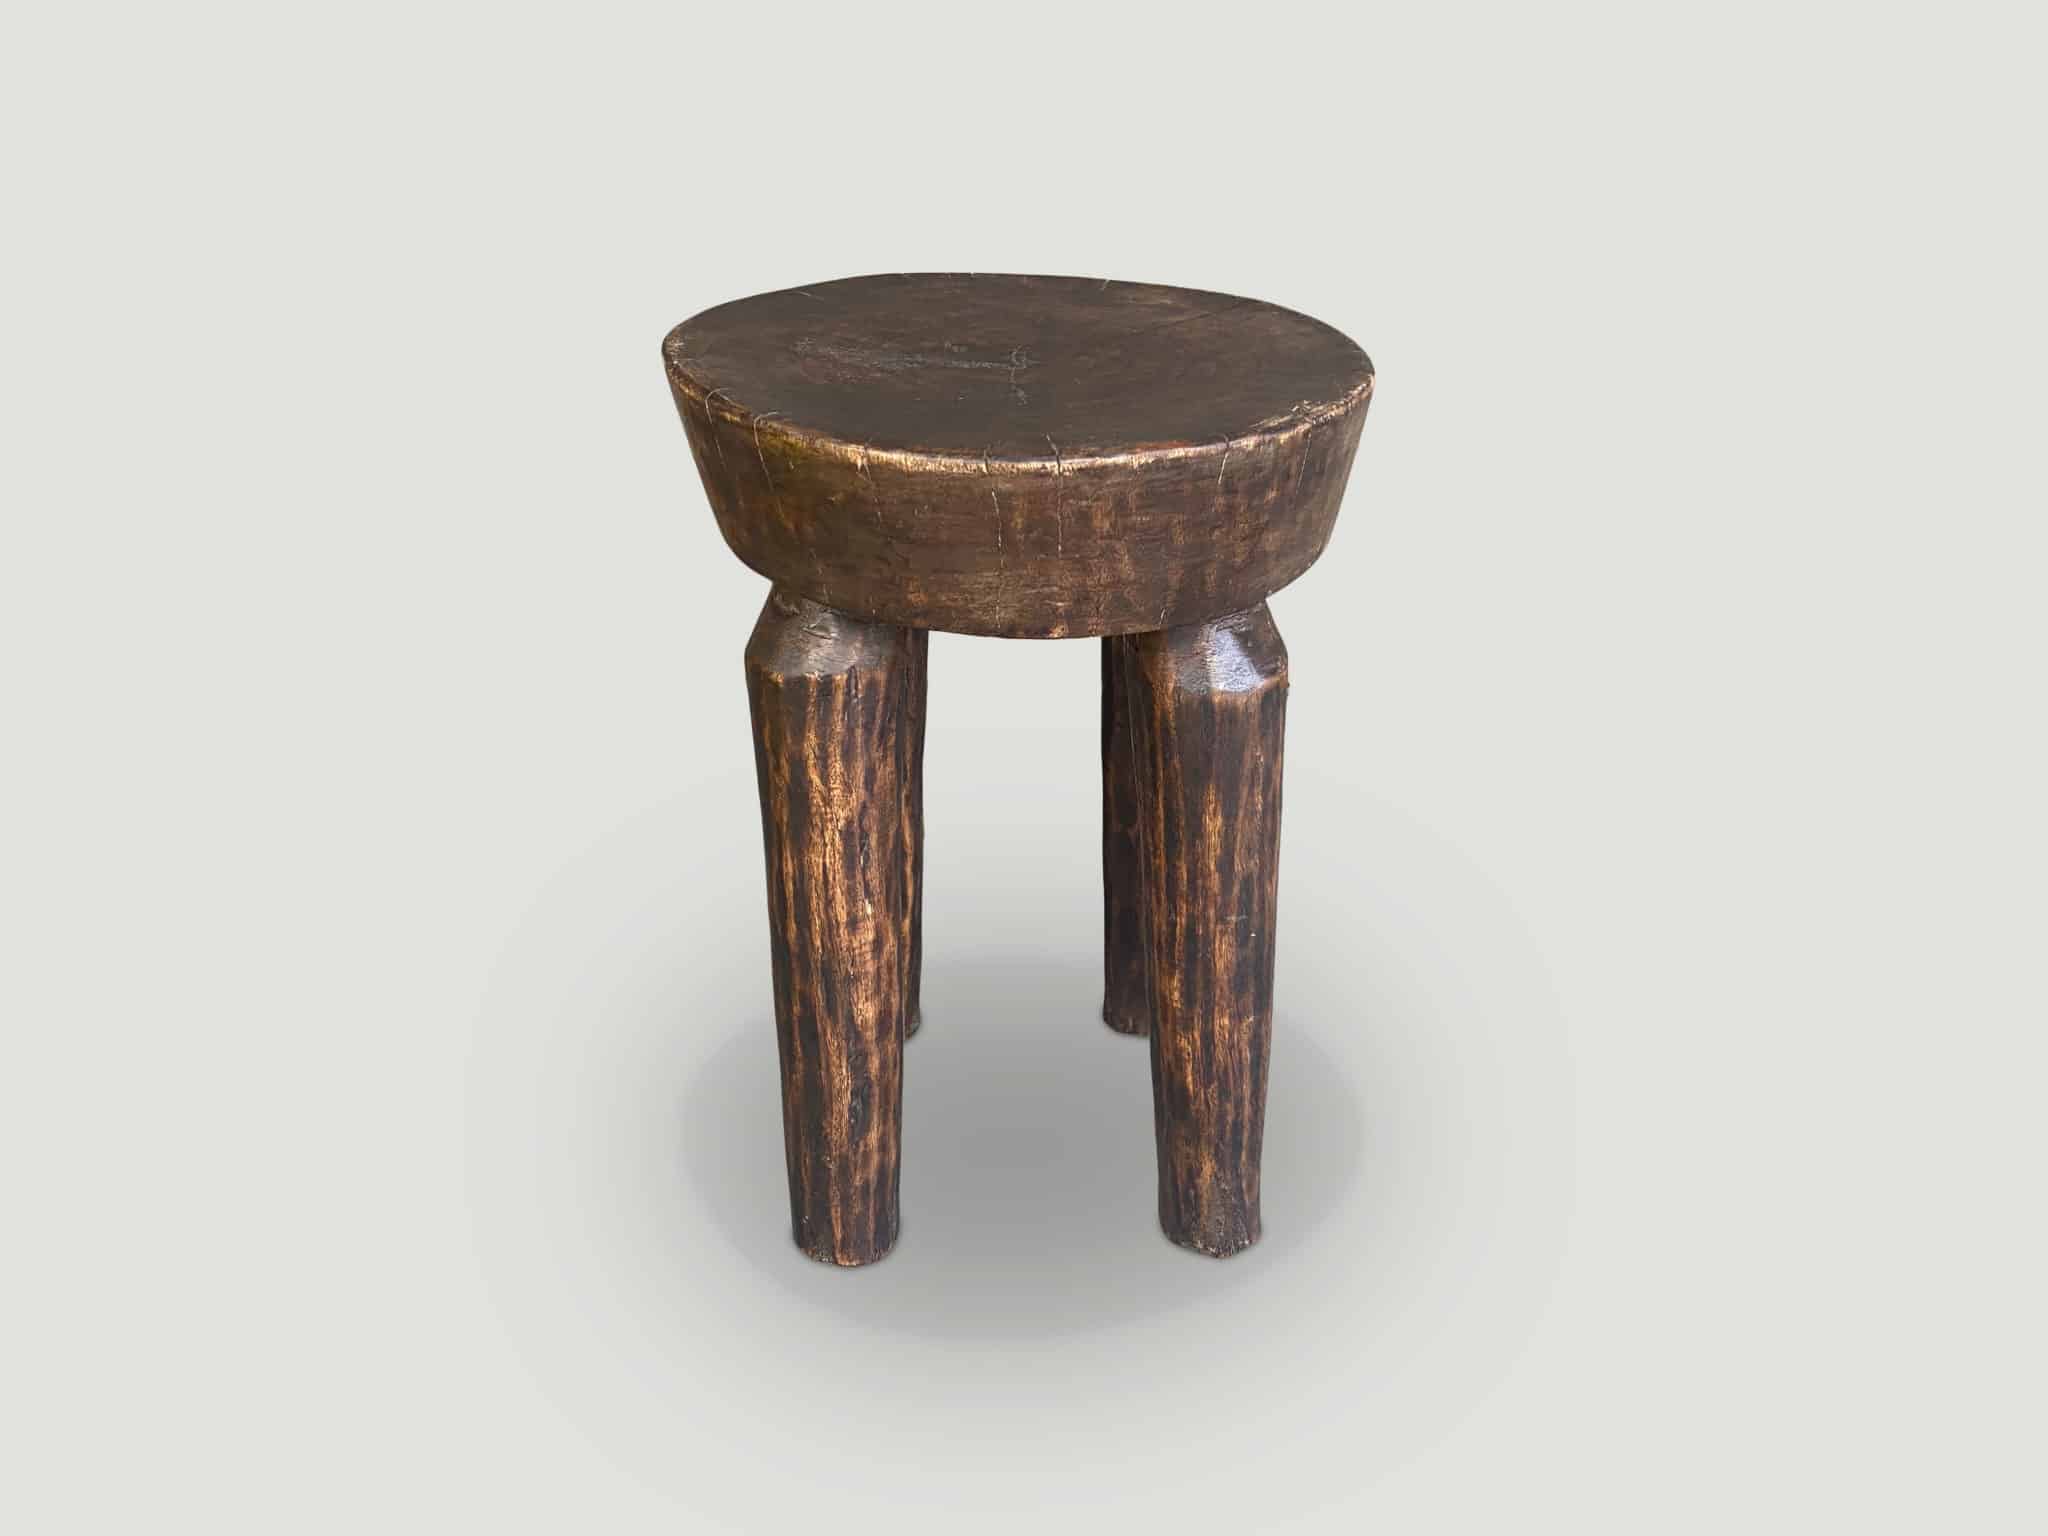 Antique African side table or stool